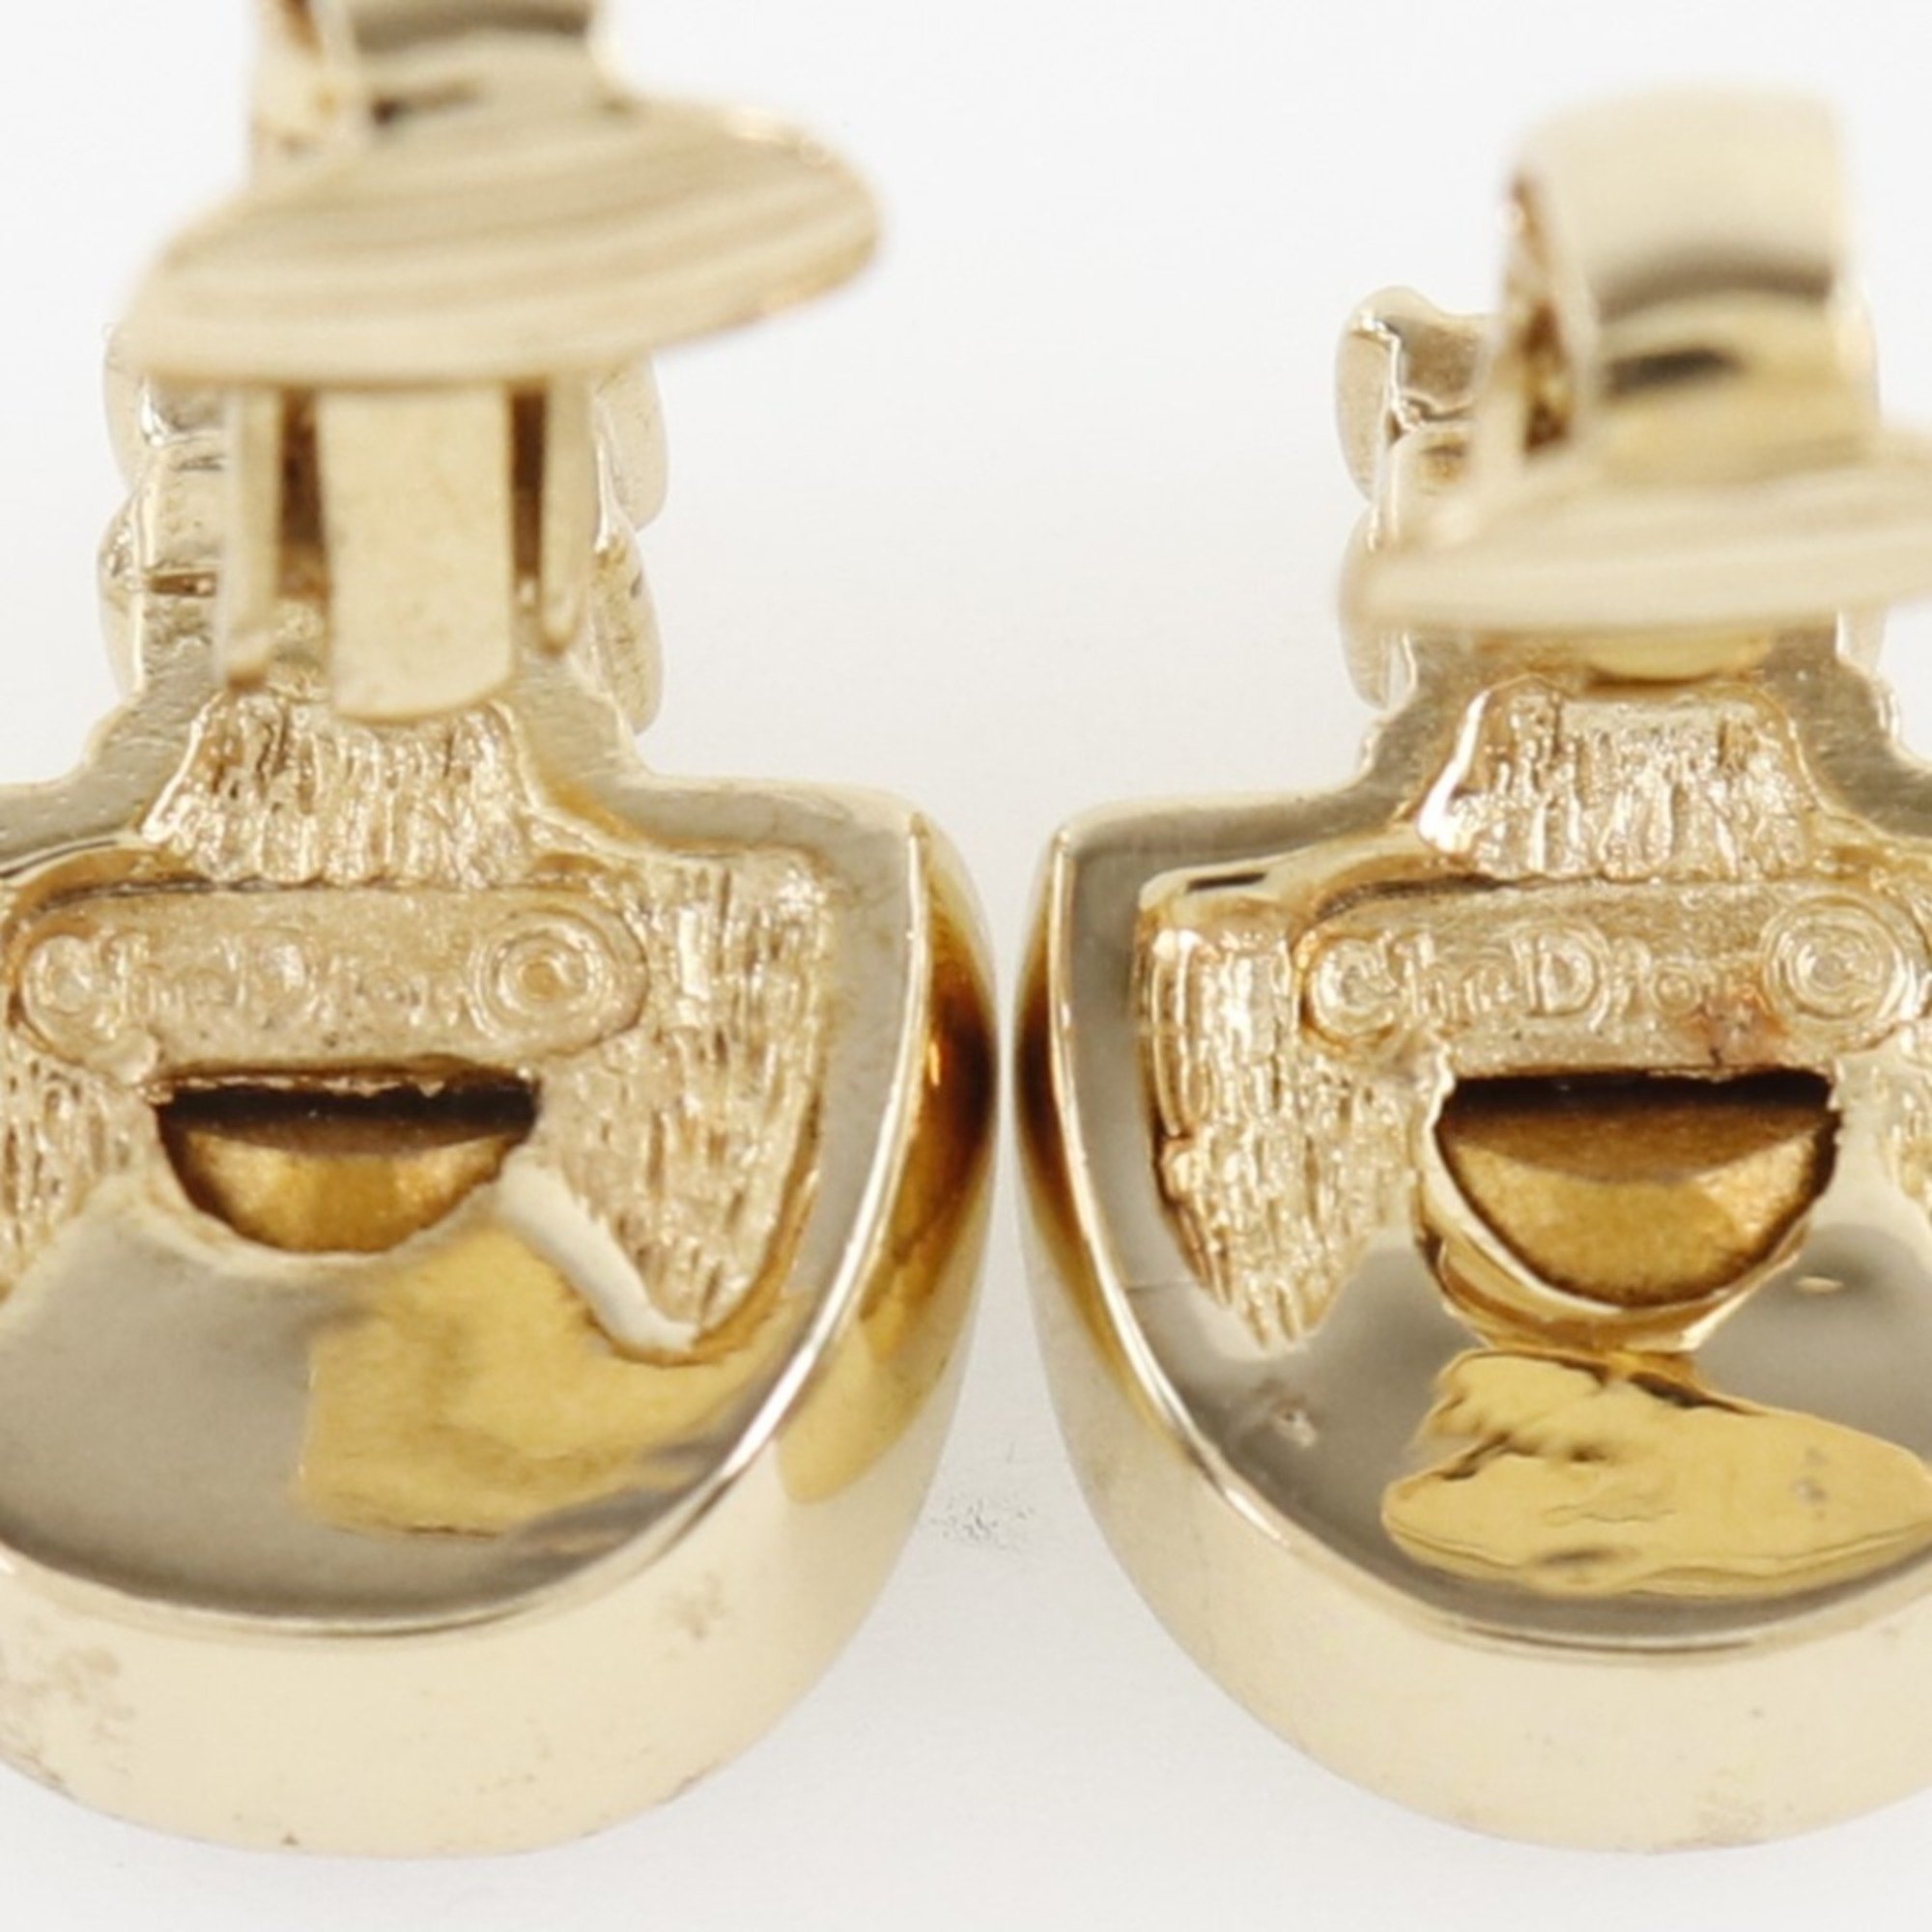 Christian Dior gold-plated ladies earrings